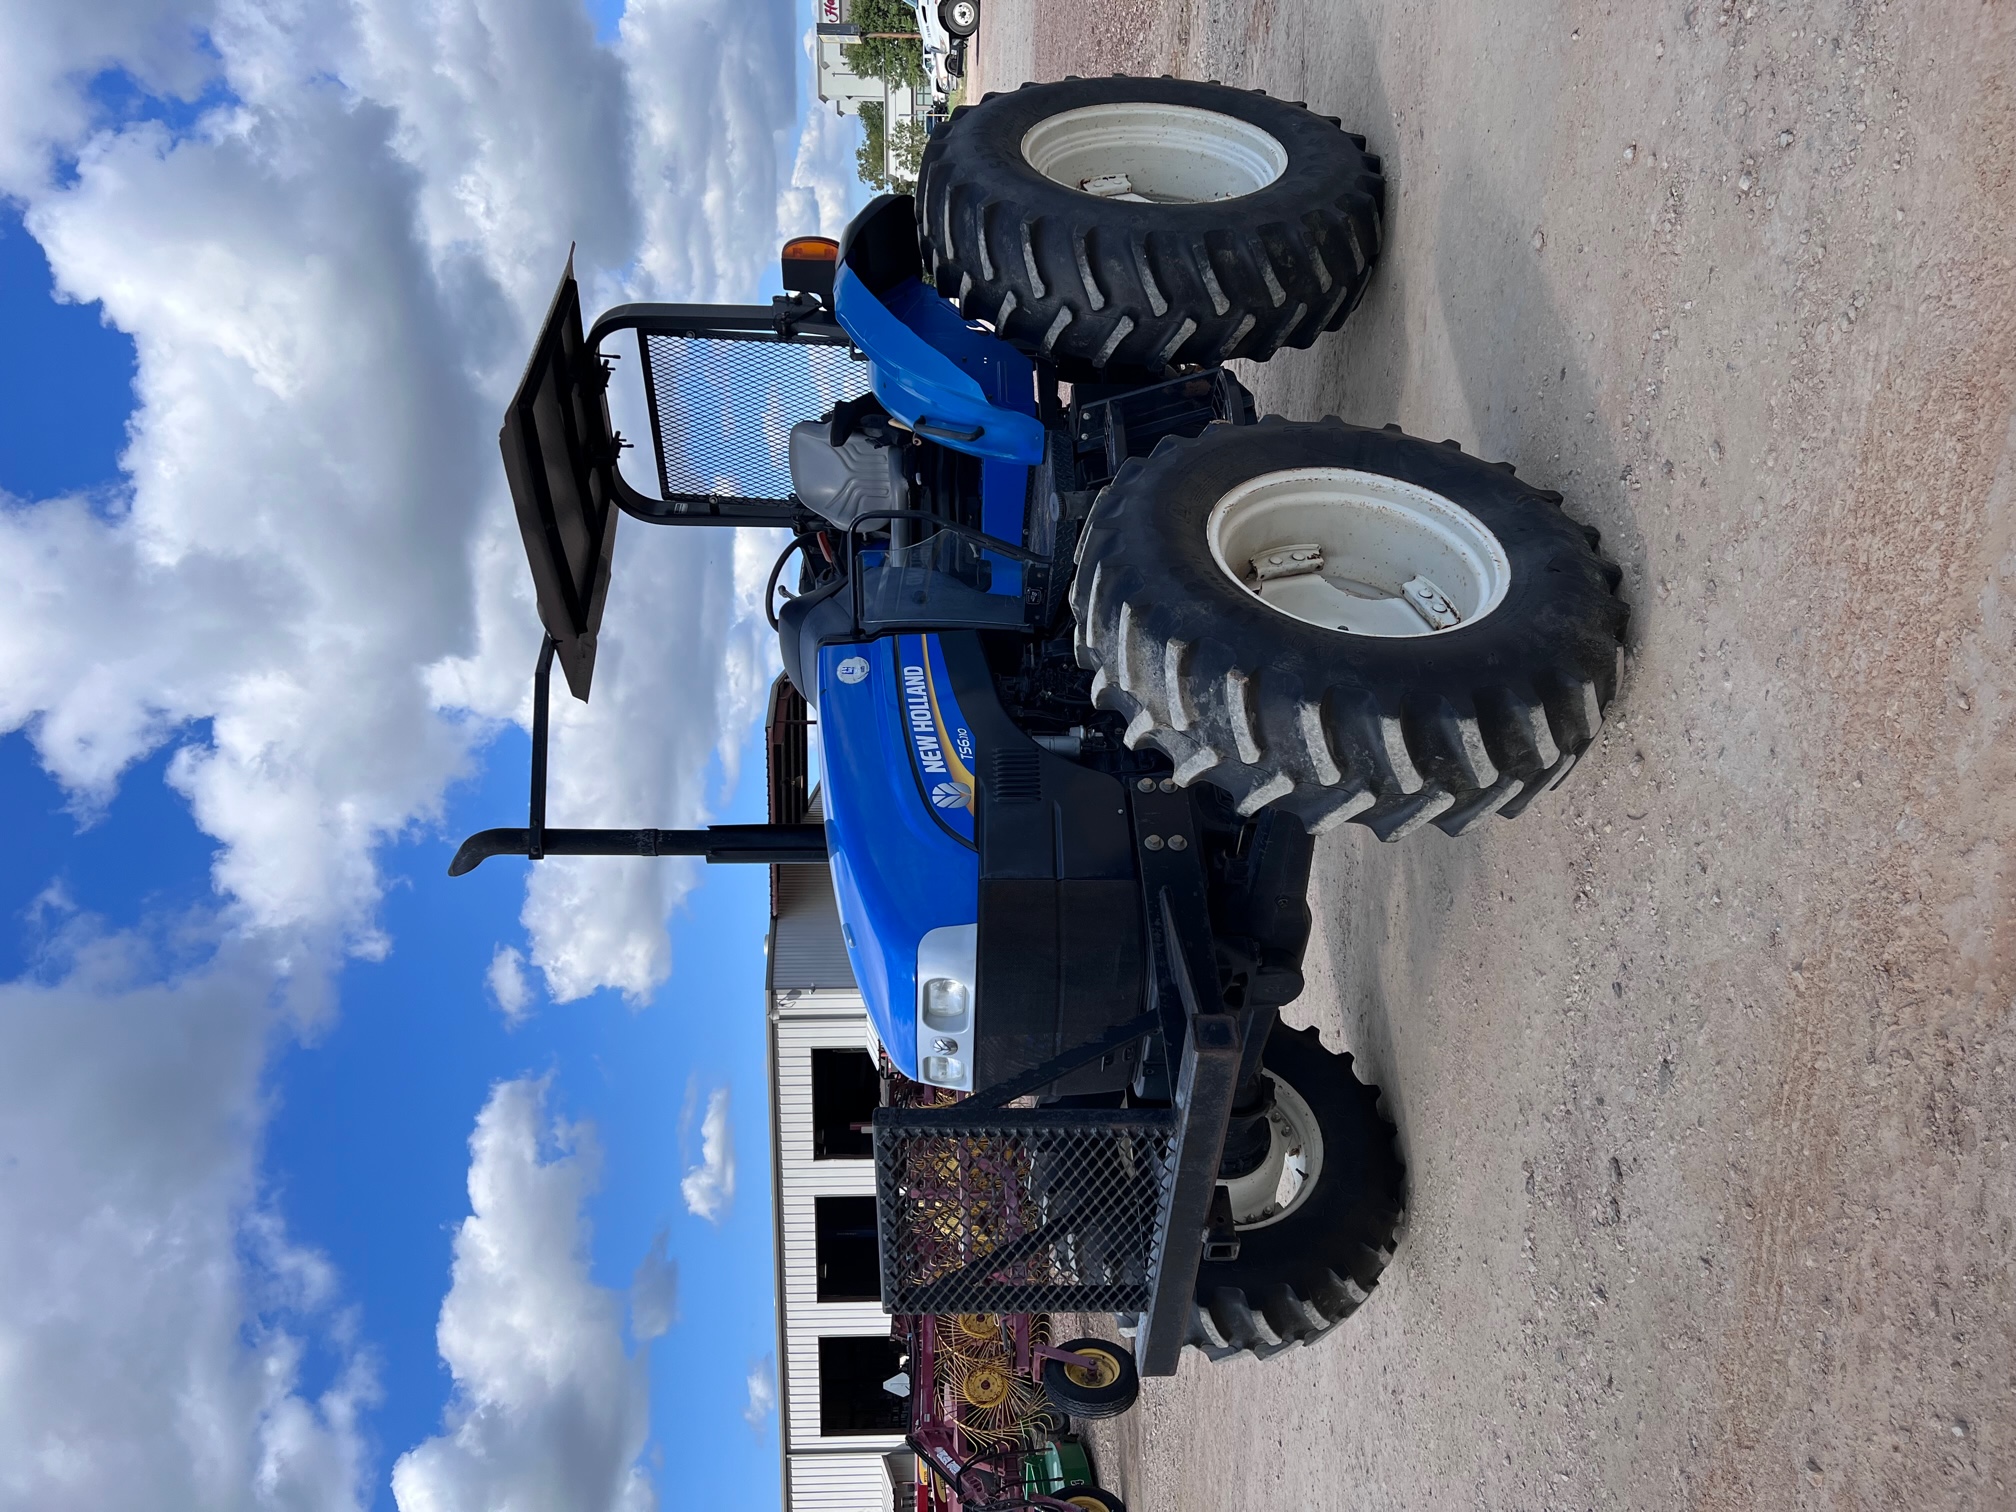 2013 New Holland TS6.110 Tractor